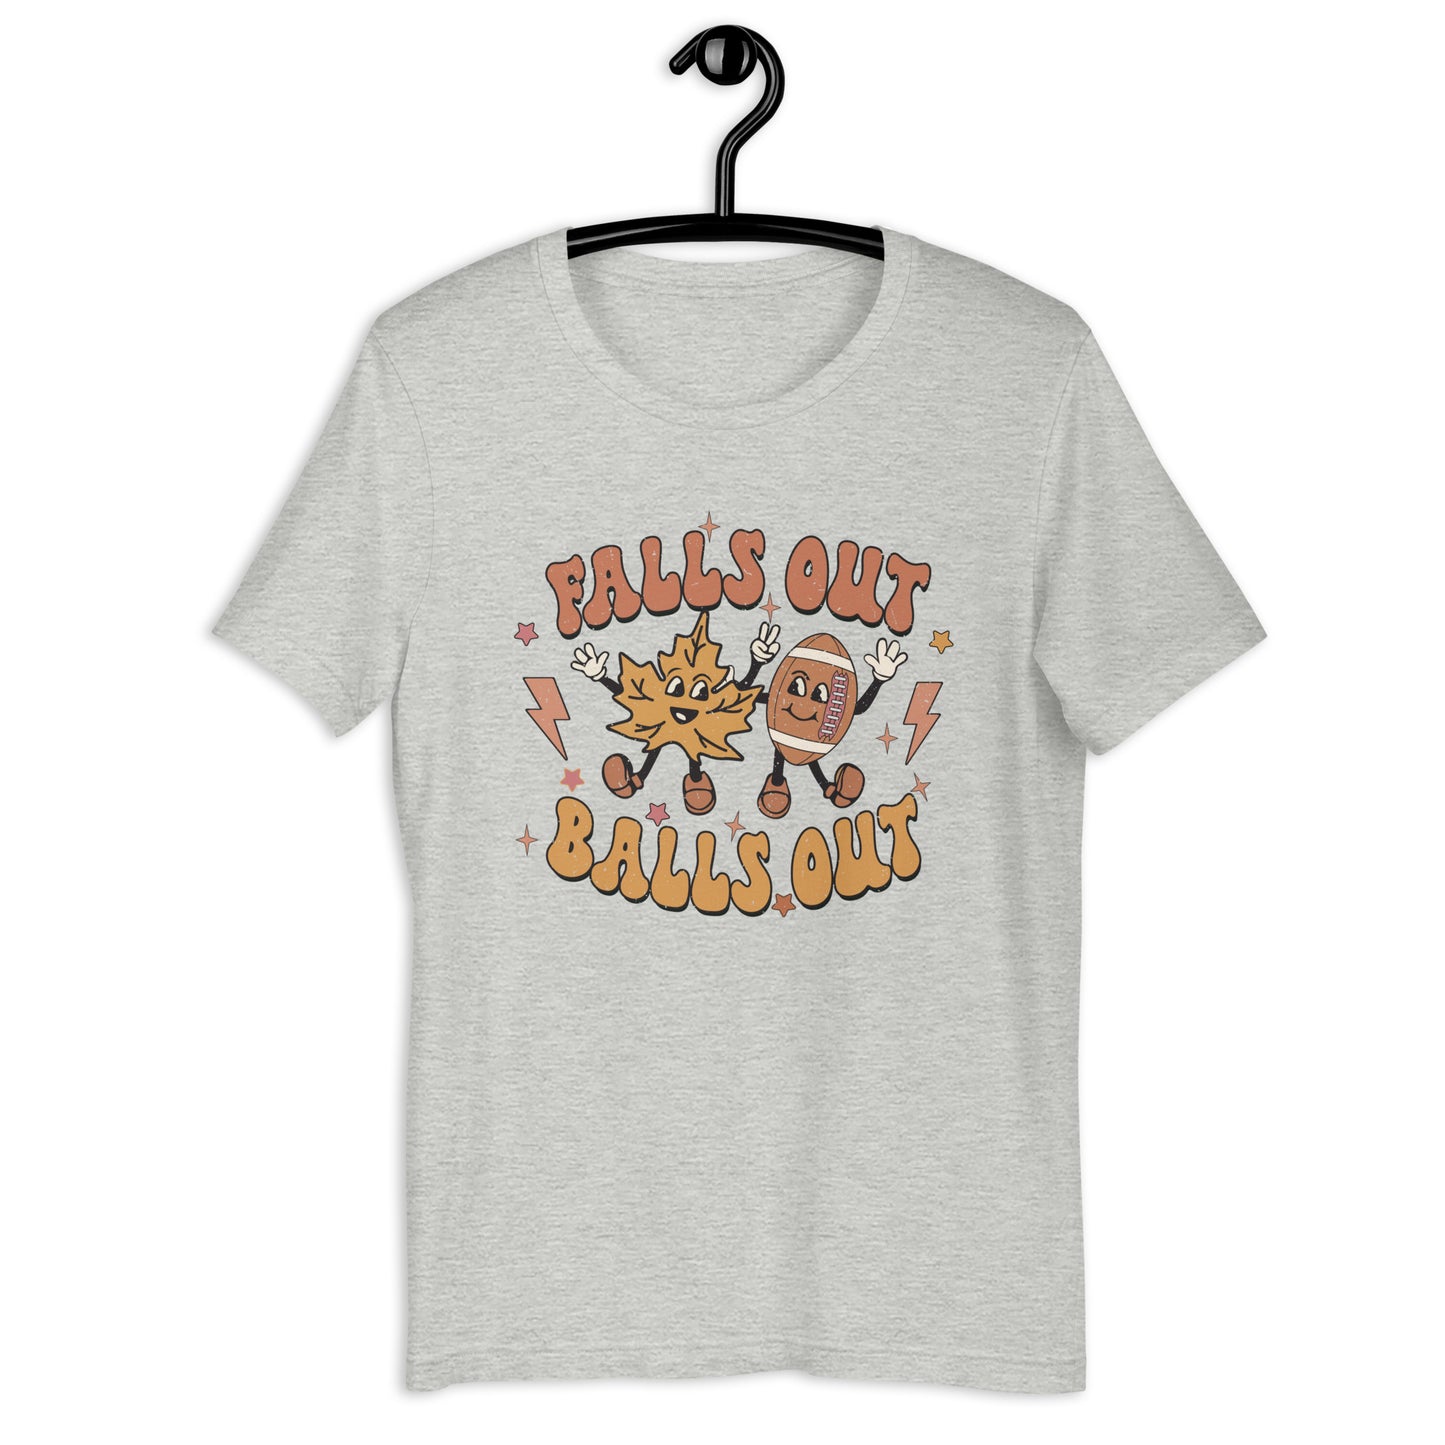 Falls out Balls out t-shirt